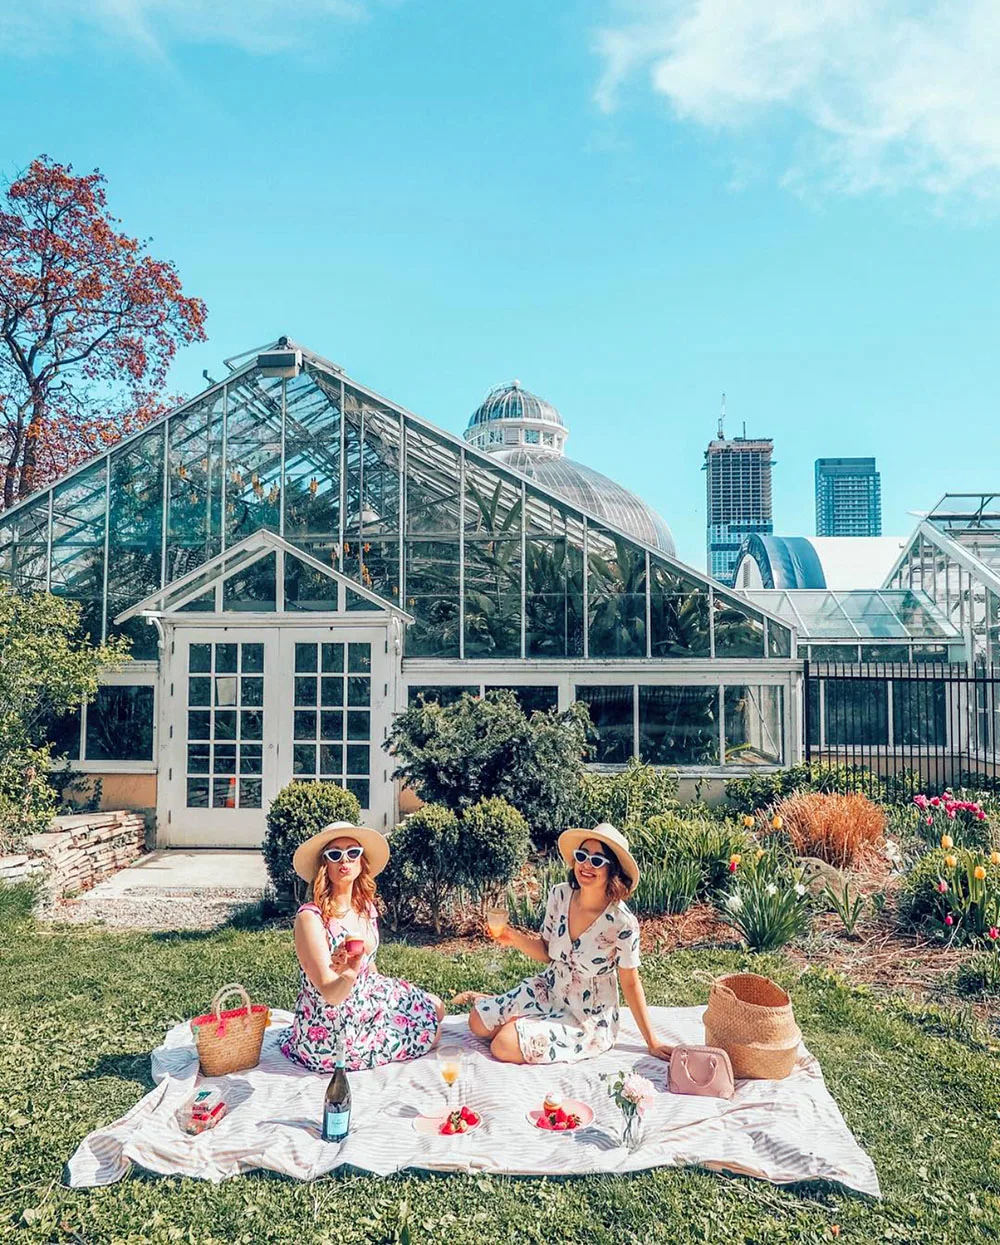 Looking for an incredible place to enjoy your next picnic in Toronto? This guide features some of the best picnic spots in Toronto from a local's perspective. Whether you're looking to picnic in a park, to spend your day sunning and snacking on a beach, prefer a garden hang, or want to check out a more unique destination, this guide has all of the best picnic spots for you to choose from. Pictured here: Allan Gardens